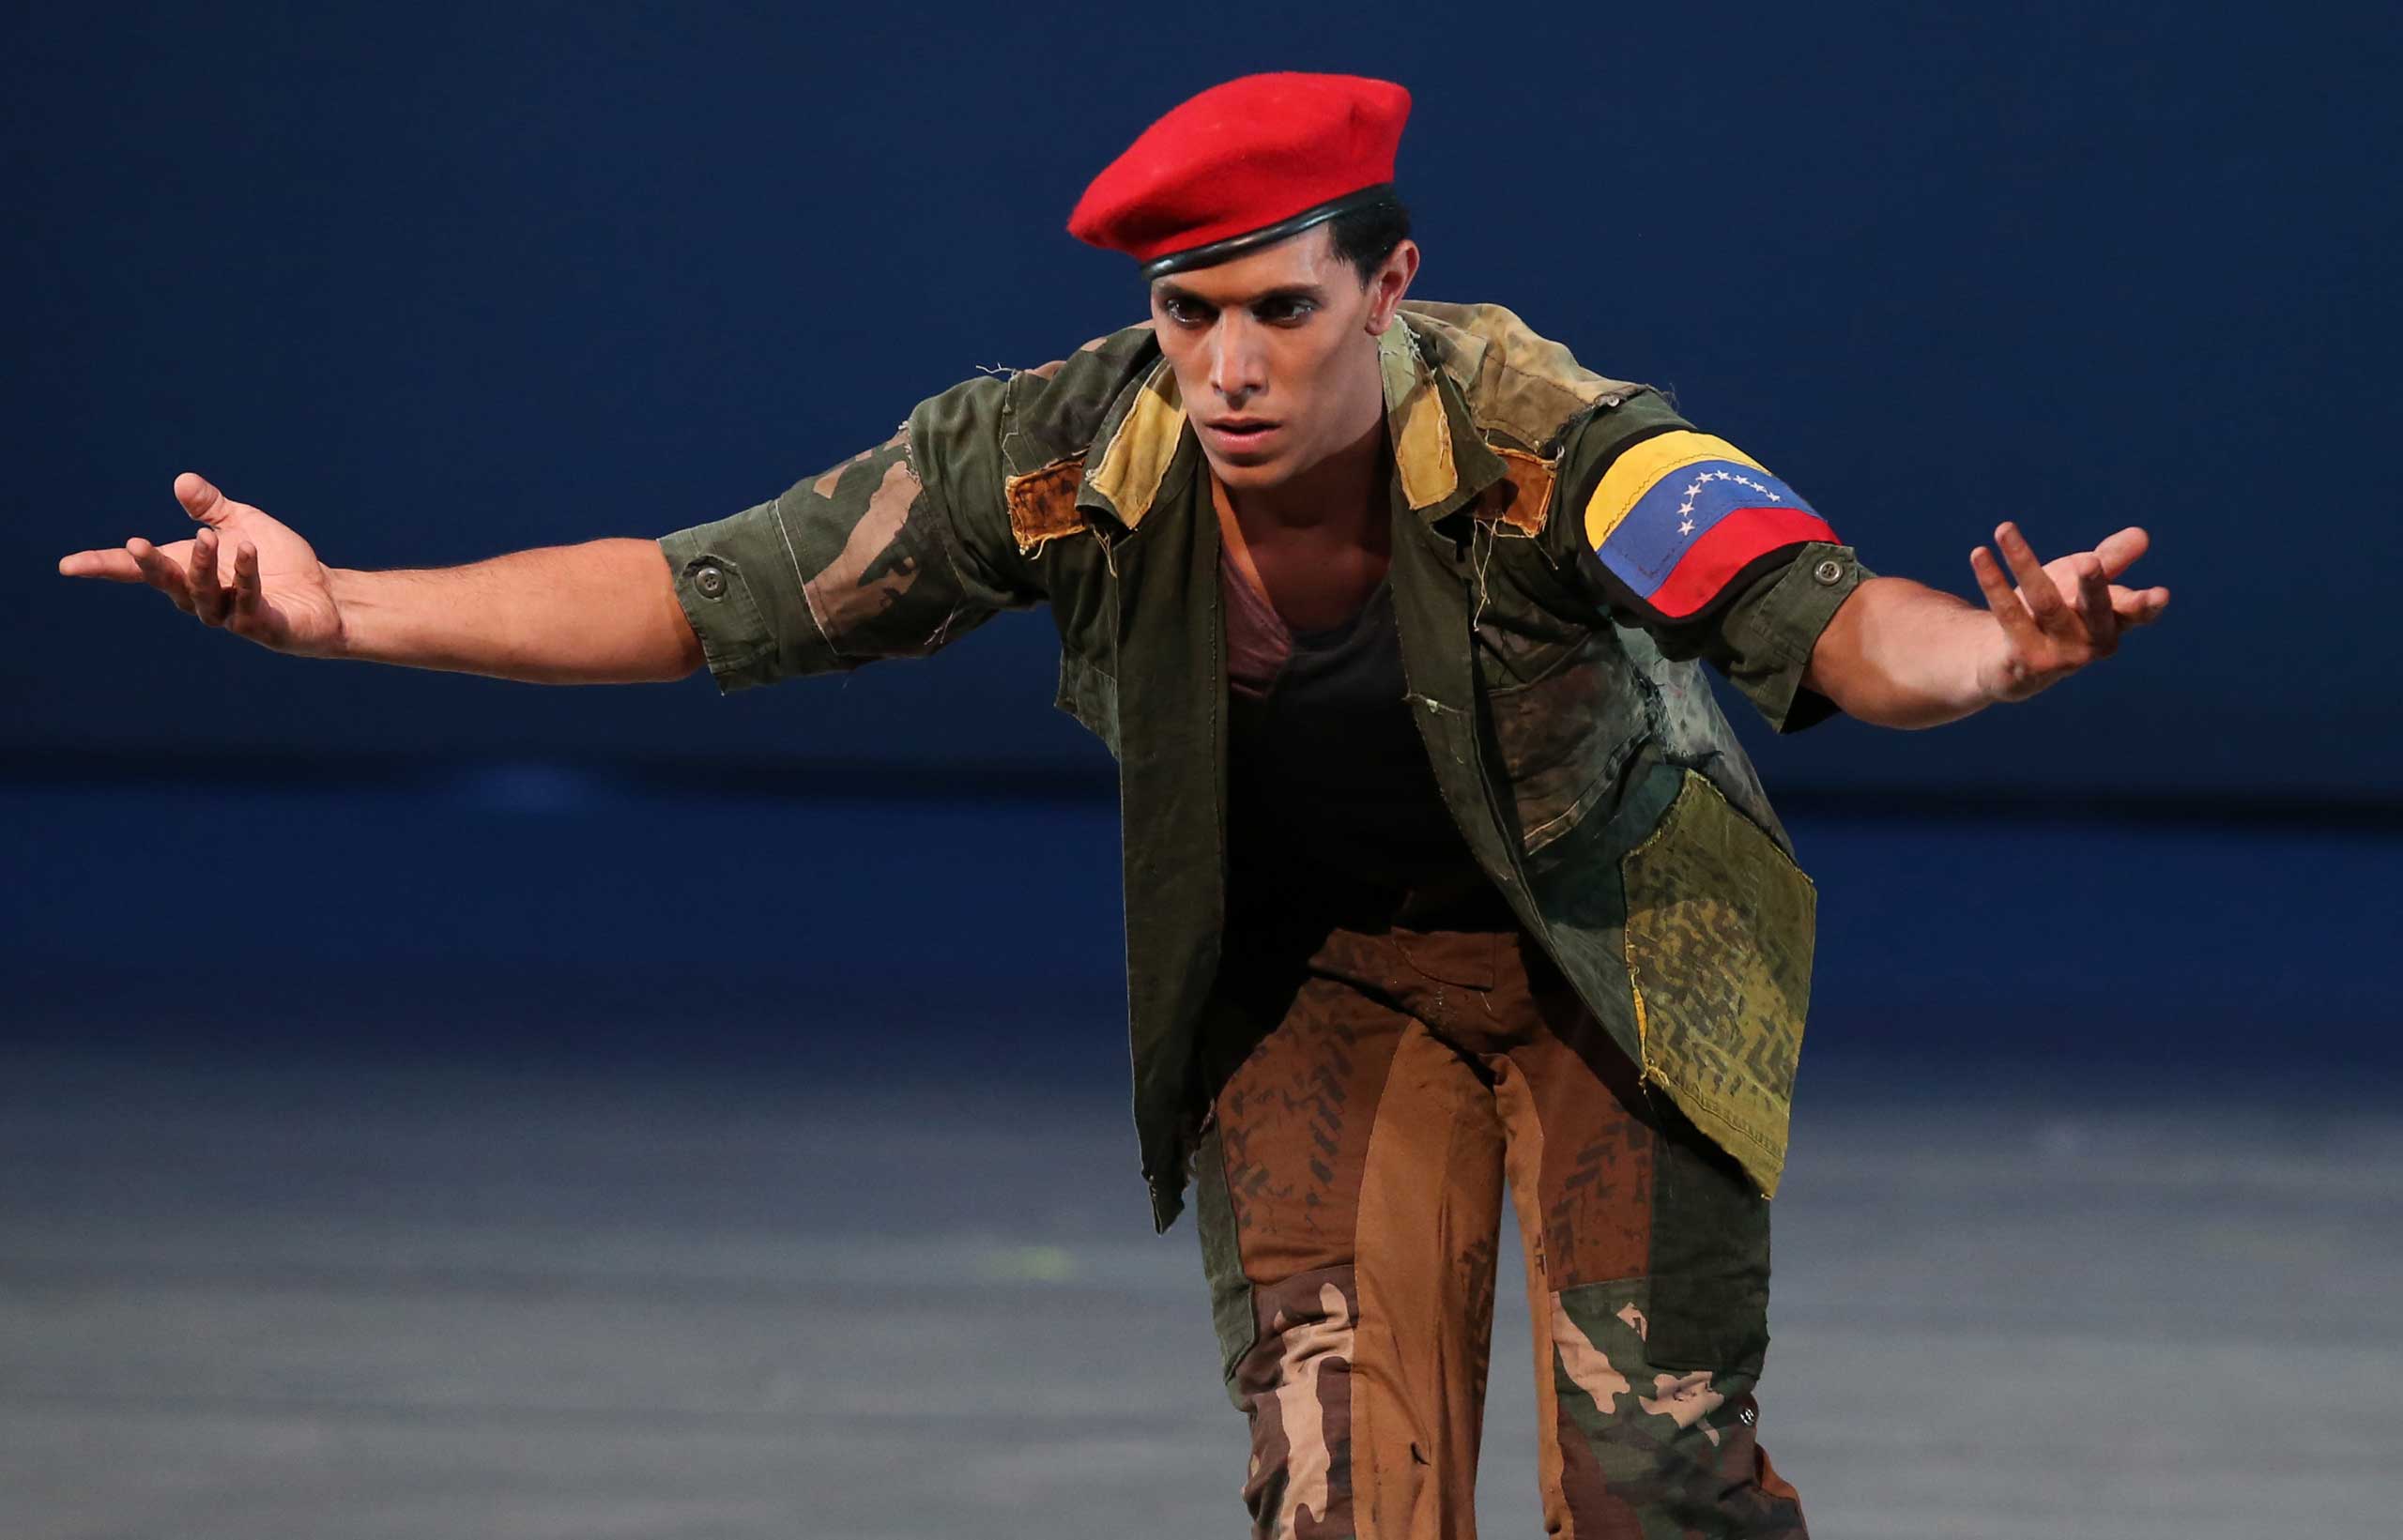 John Lobo, 29, performing as Venezuela's late president Hugo Chavez in the star role of the "Ballet of the Spider-Seller to Liberator", at the Teresa Carreno Theater in Caracas, Nov. 27, 2014. (Ariana Cubillos—AP)